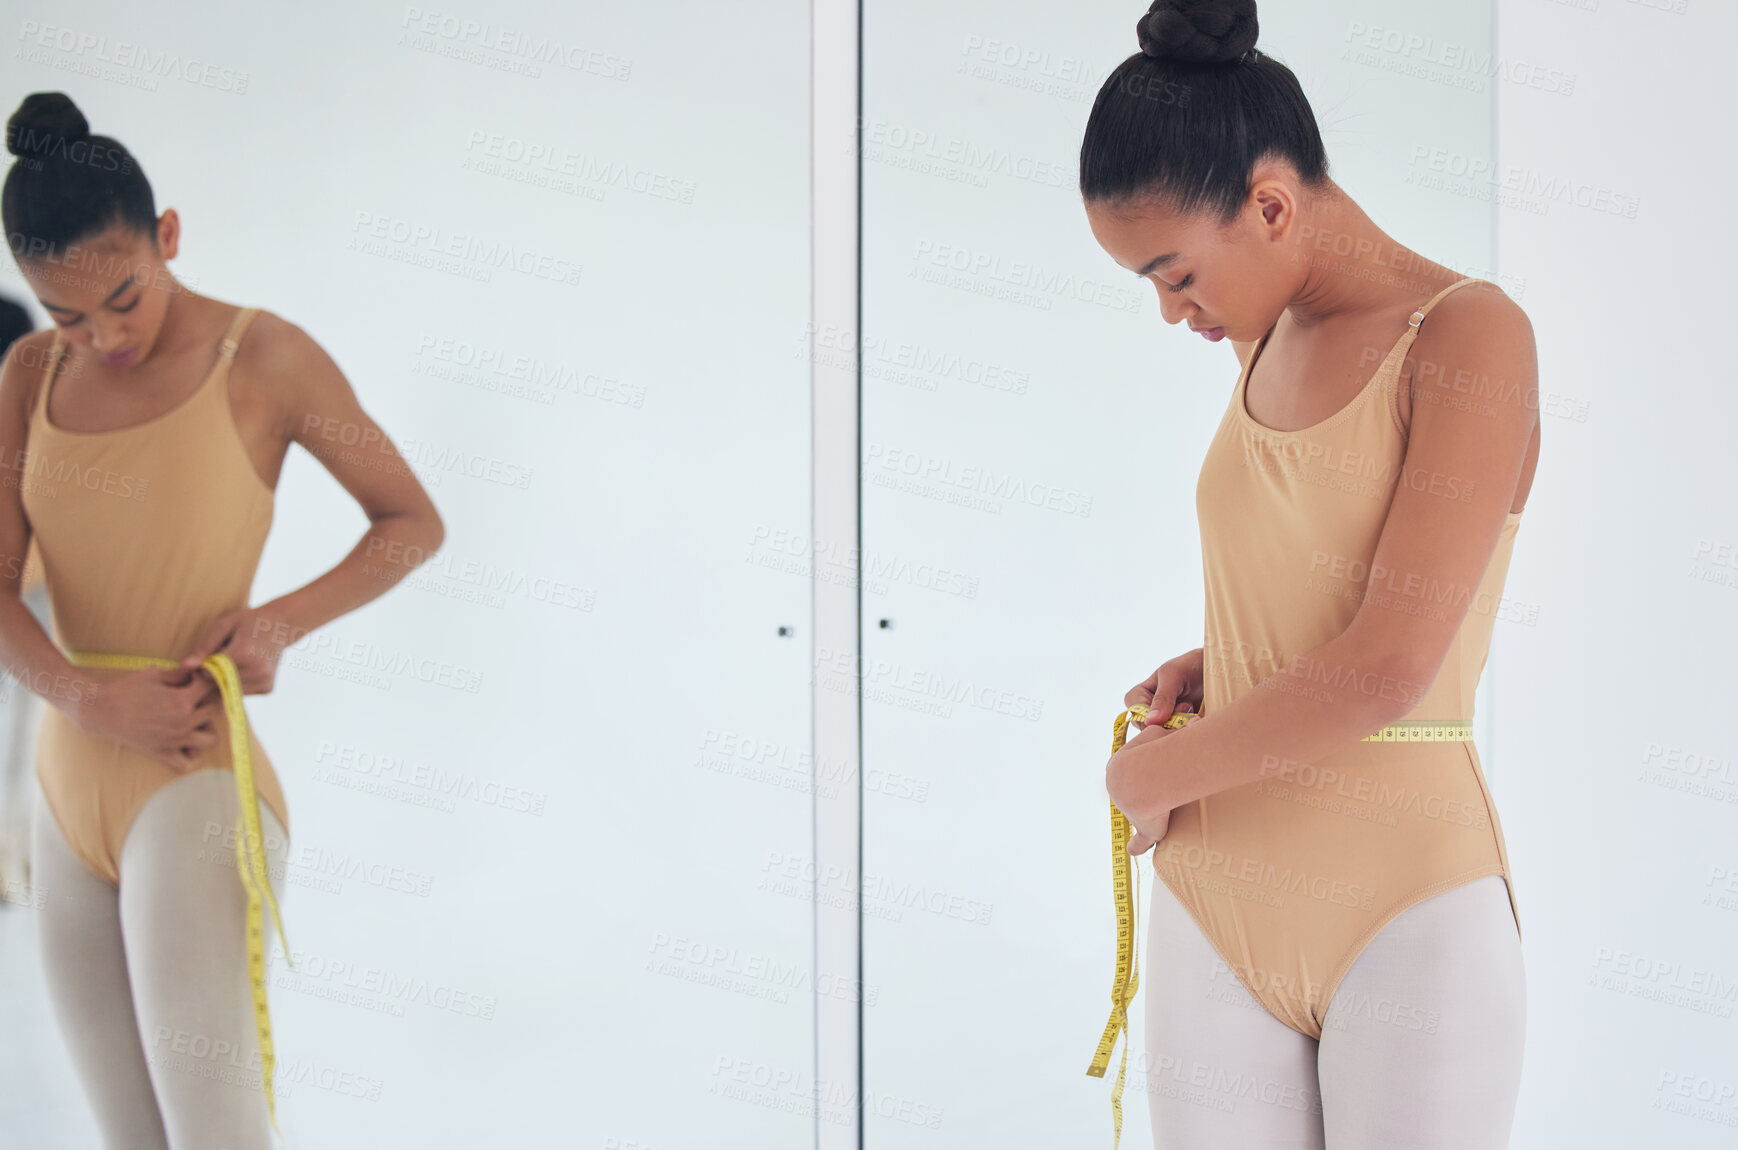 Buy stock photo Shot of a beautiful young ballet dancer measuring her waist during a rehearsal